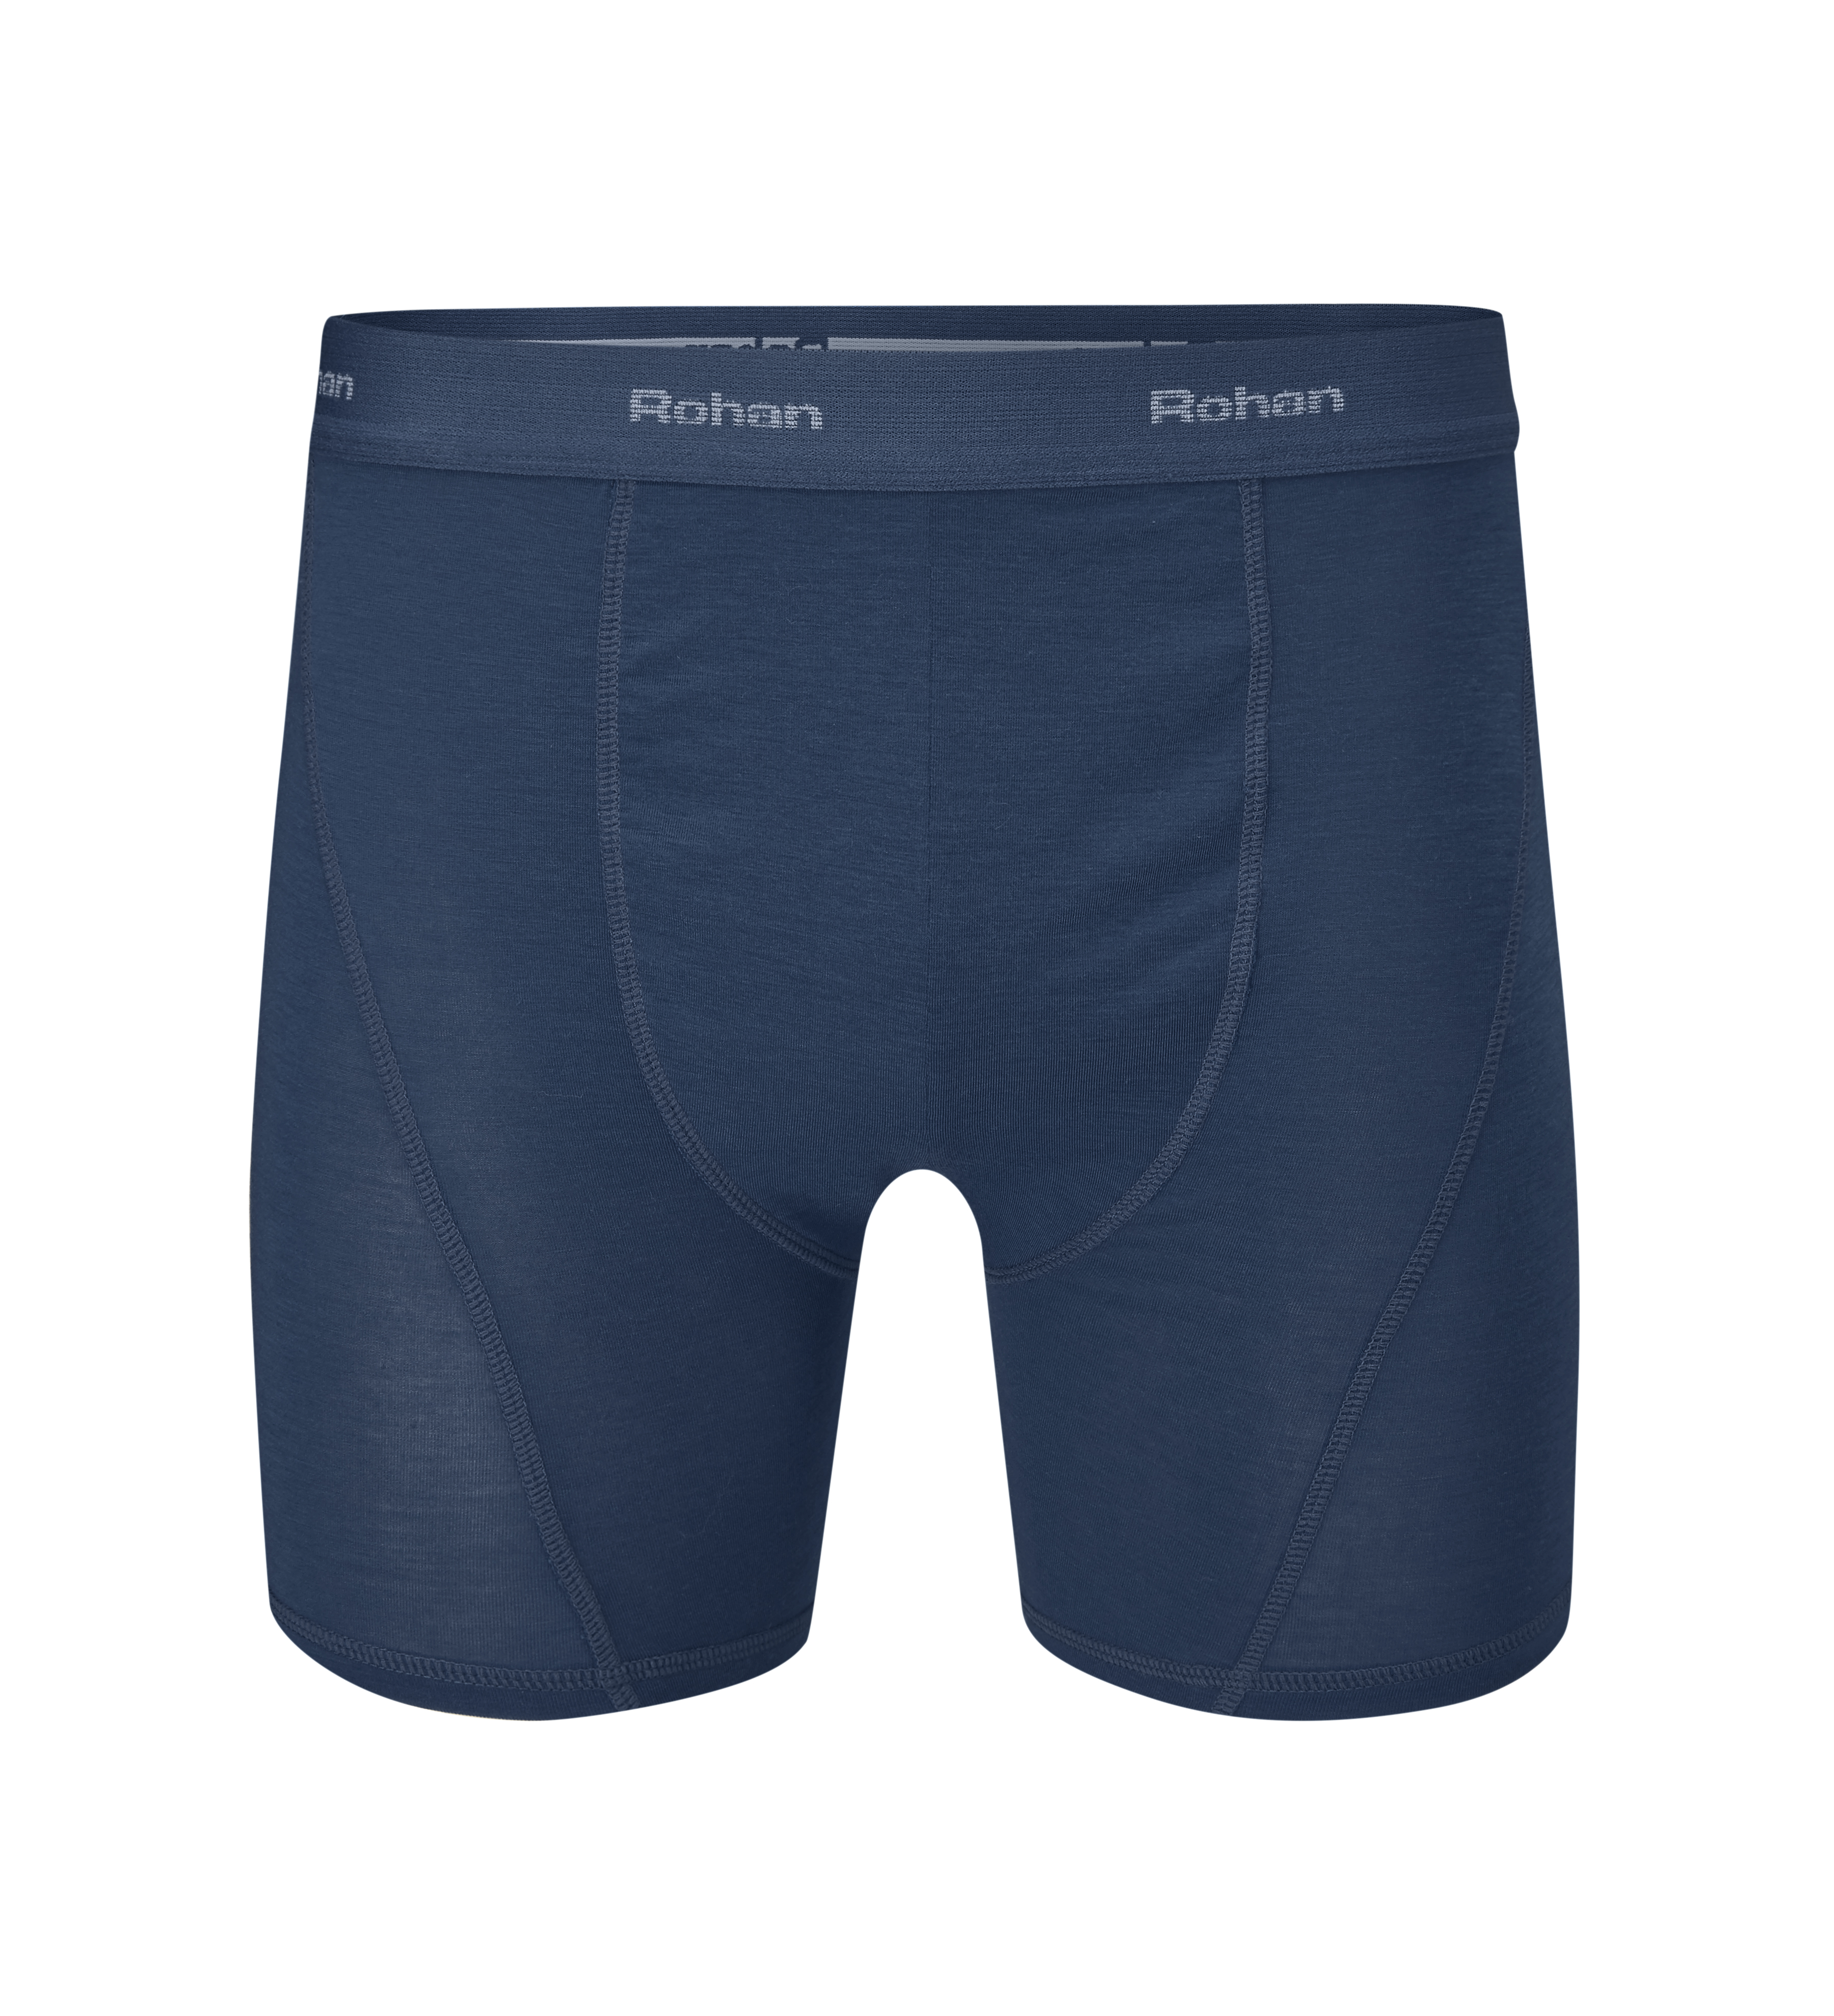 Men's Aether Boxer Shorts